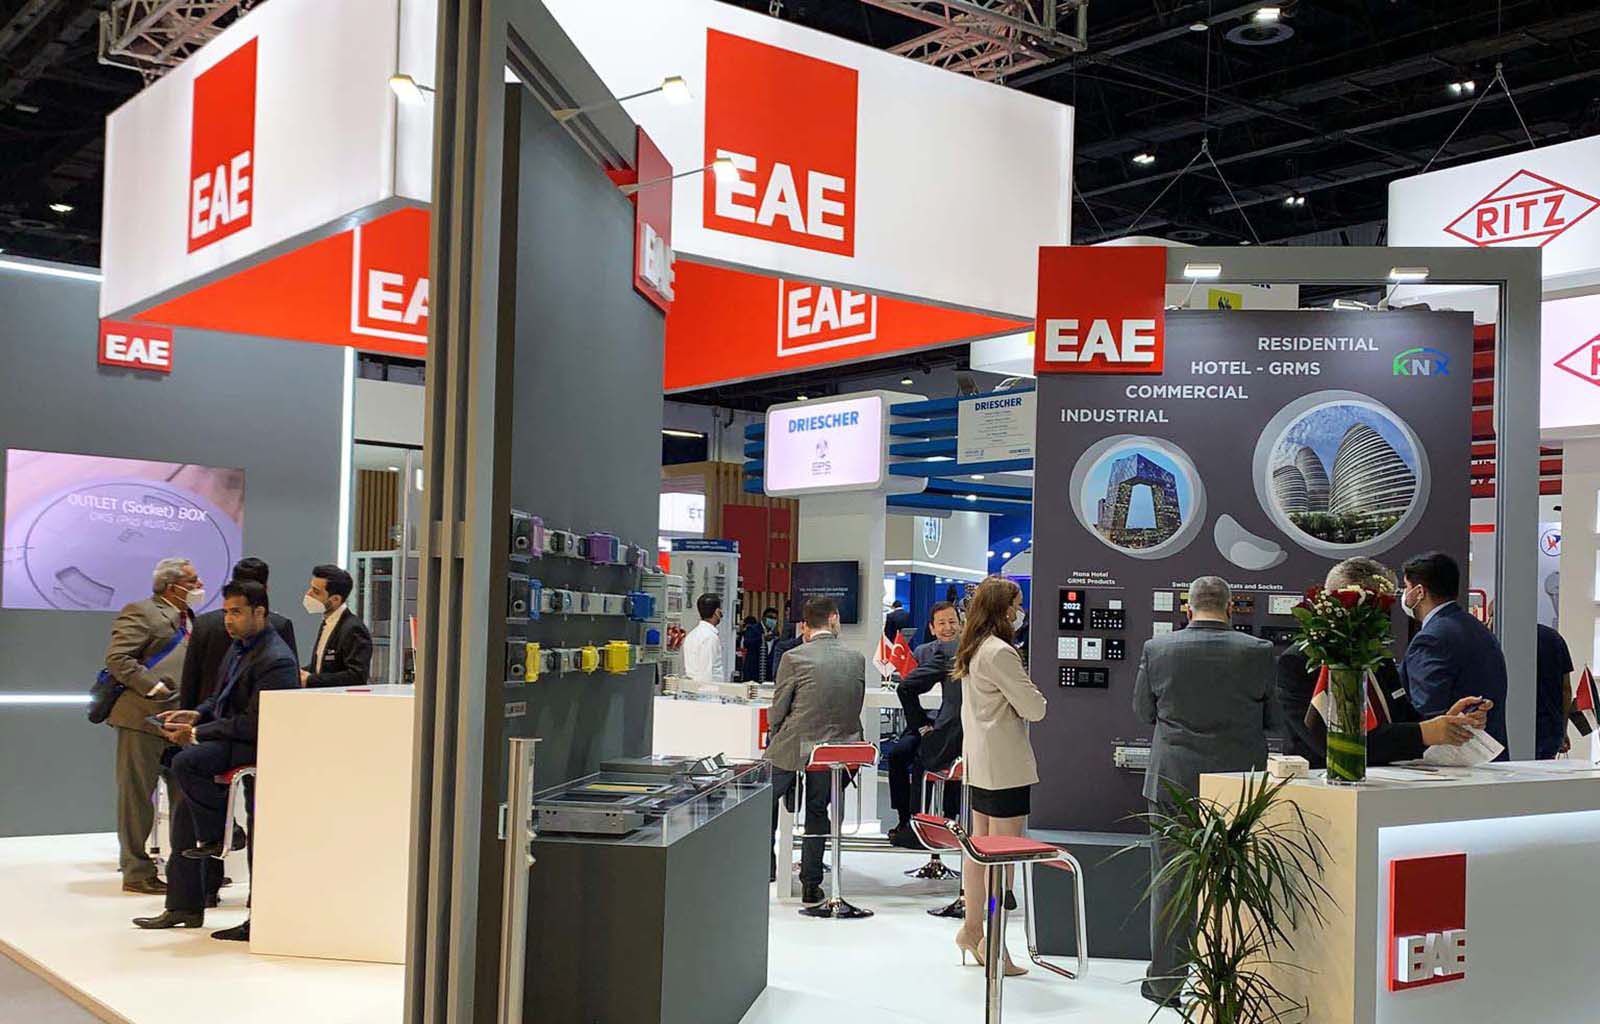 We participated in the 2022 Middle East exhibition